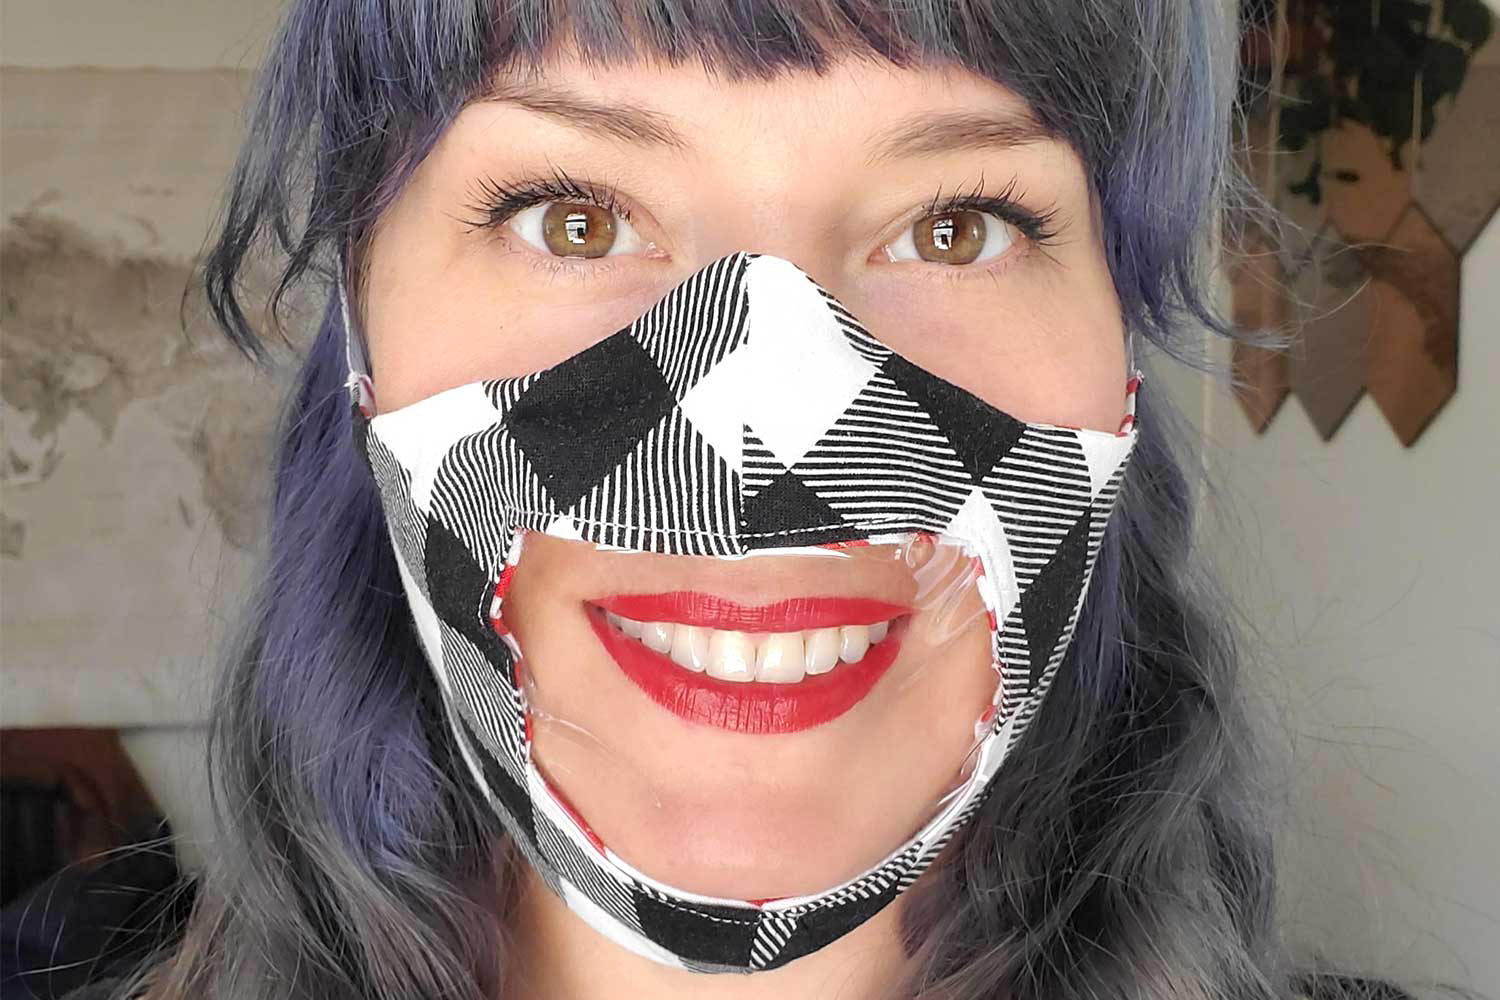 Cricut face mask with window for deaf and hard of hearing communities